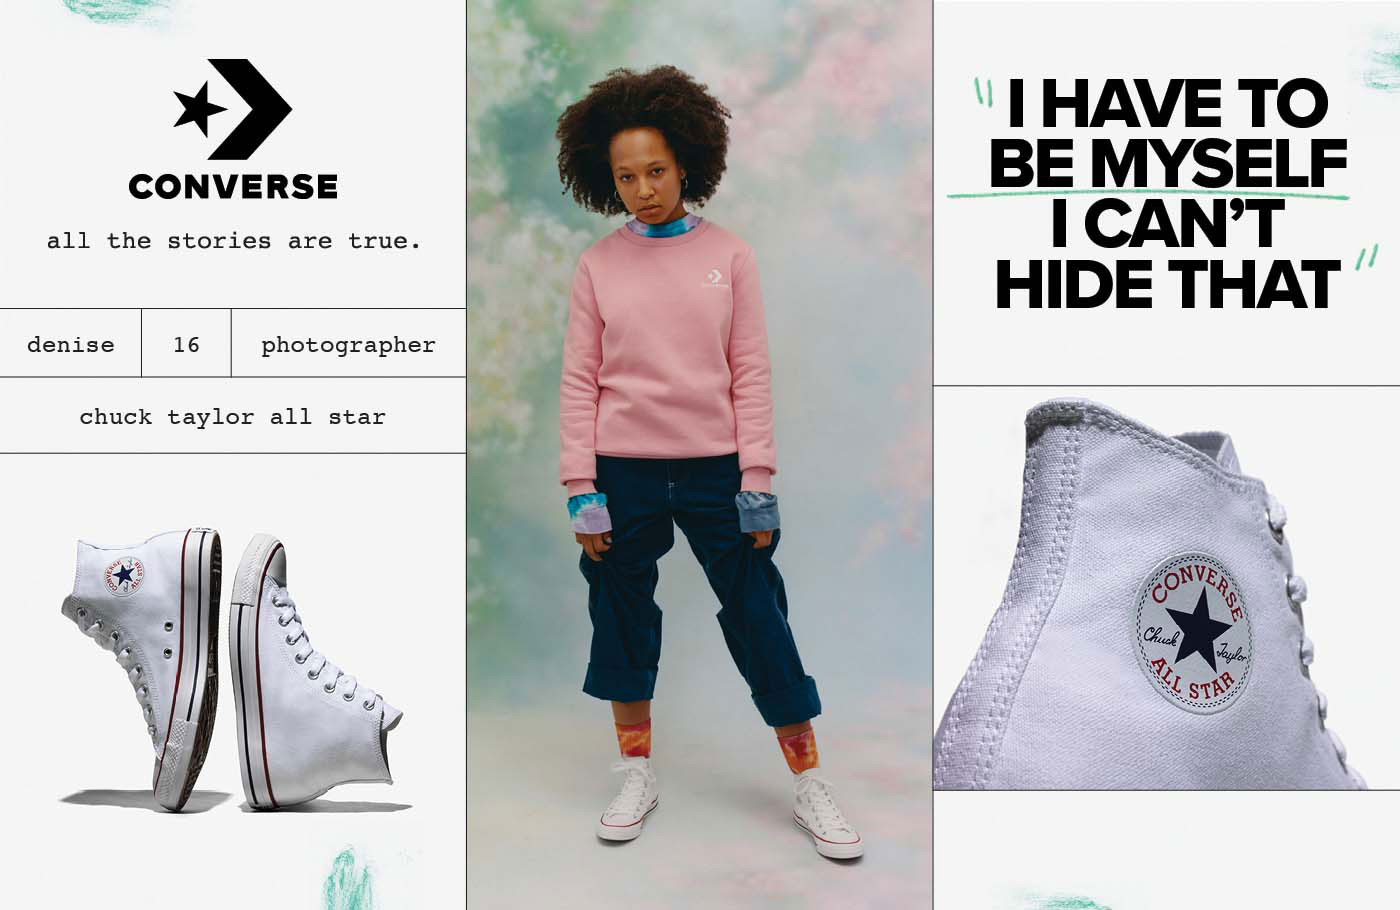 converse shoes womens 2019